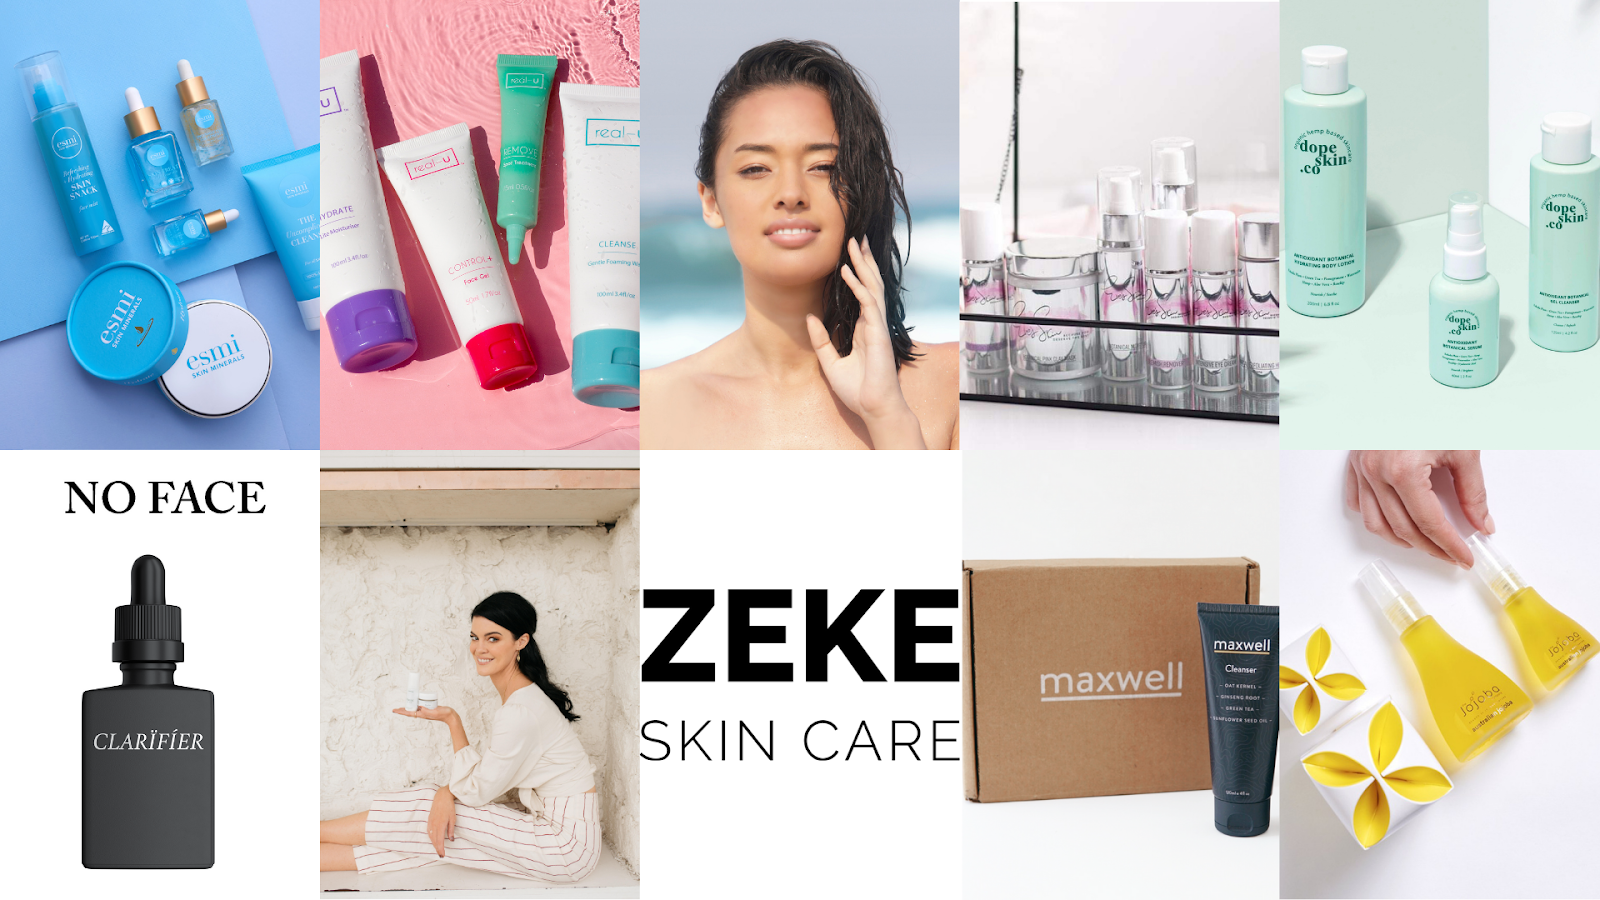 The 10 Beauty & Skincare Brands